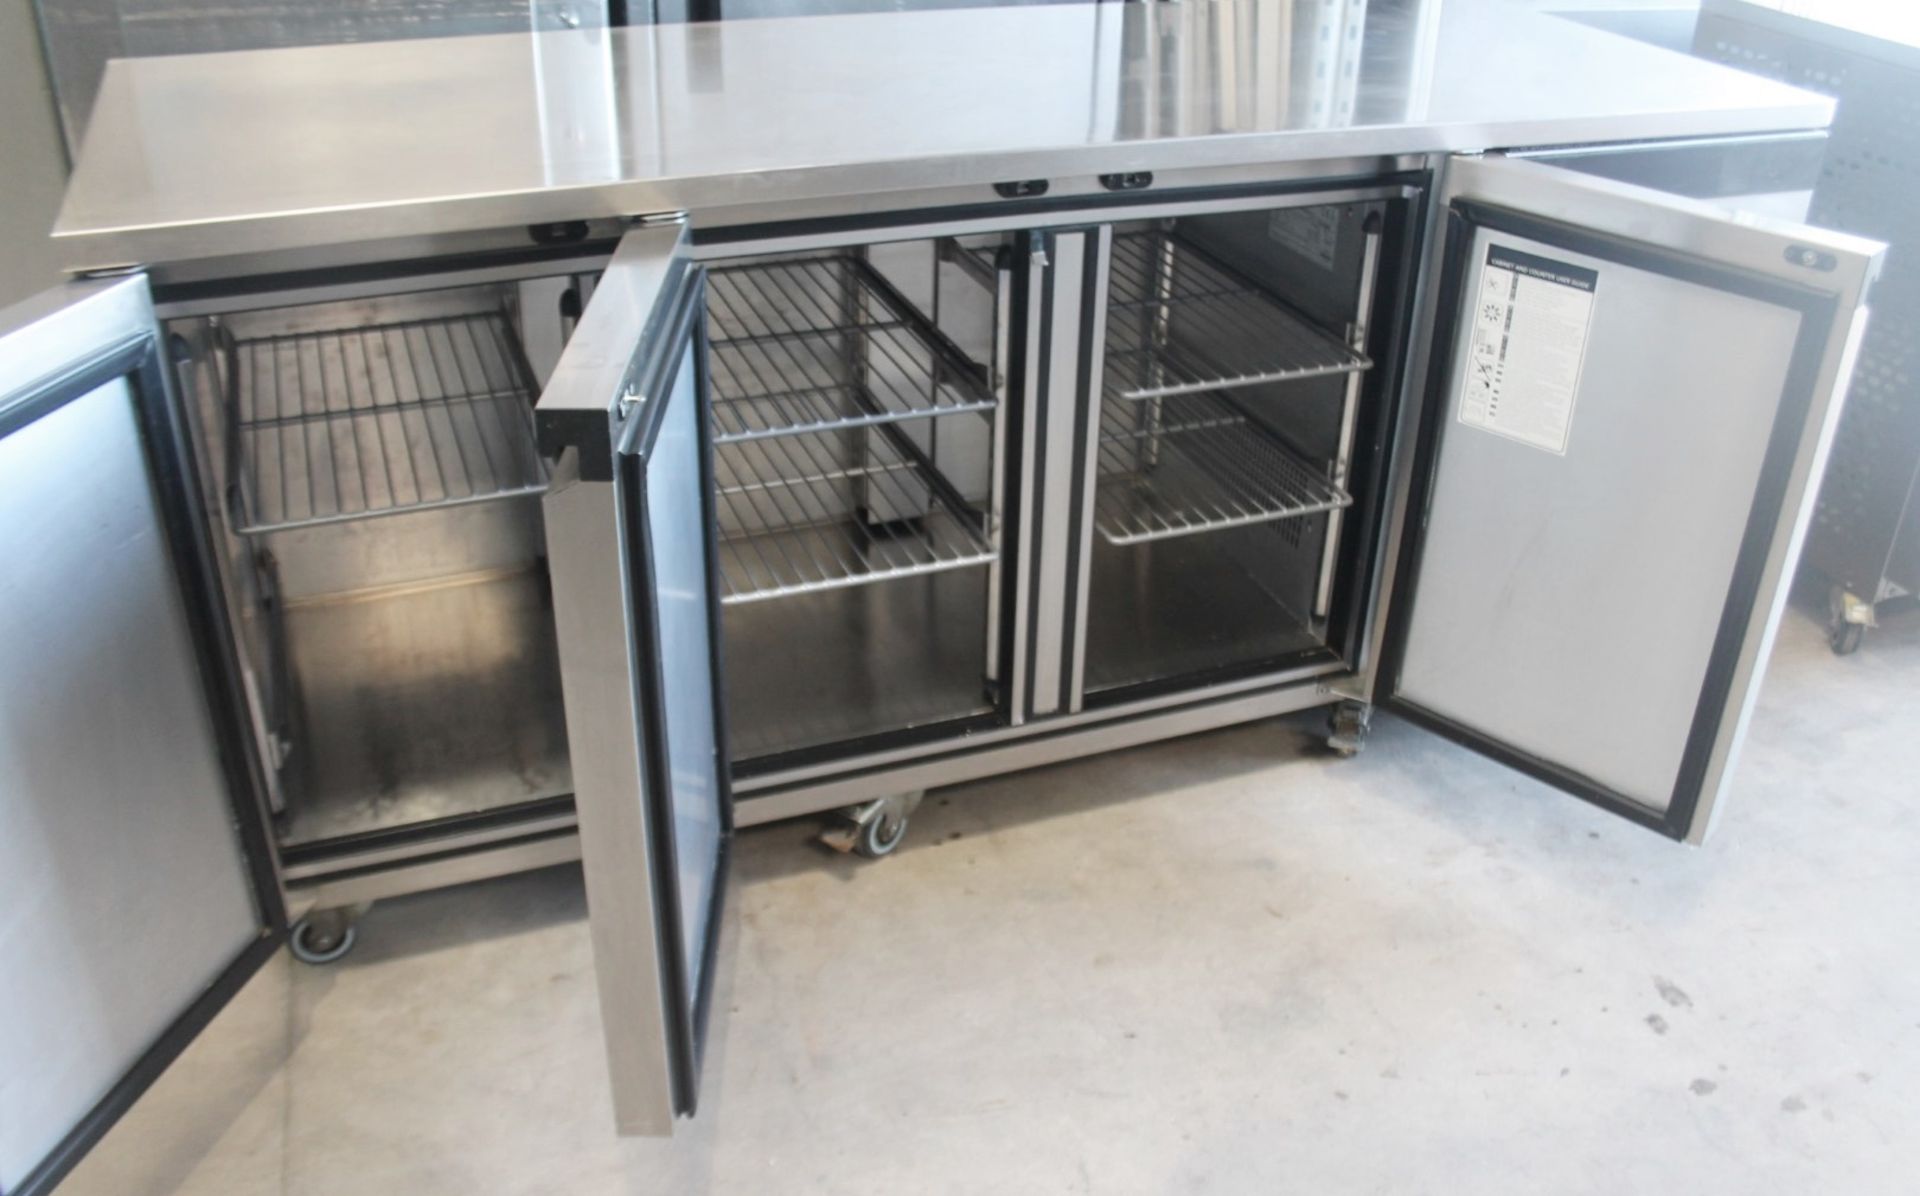 1 x Fosters EcoPro G2 3-Door Commercial Refrigerated Counter - Ref: GEN591 WH2 - CL802 UX - Image 3 of 8